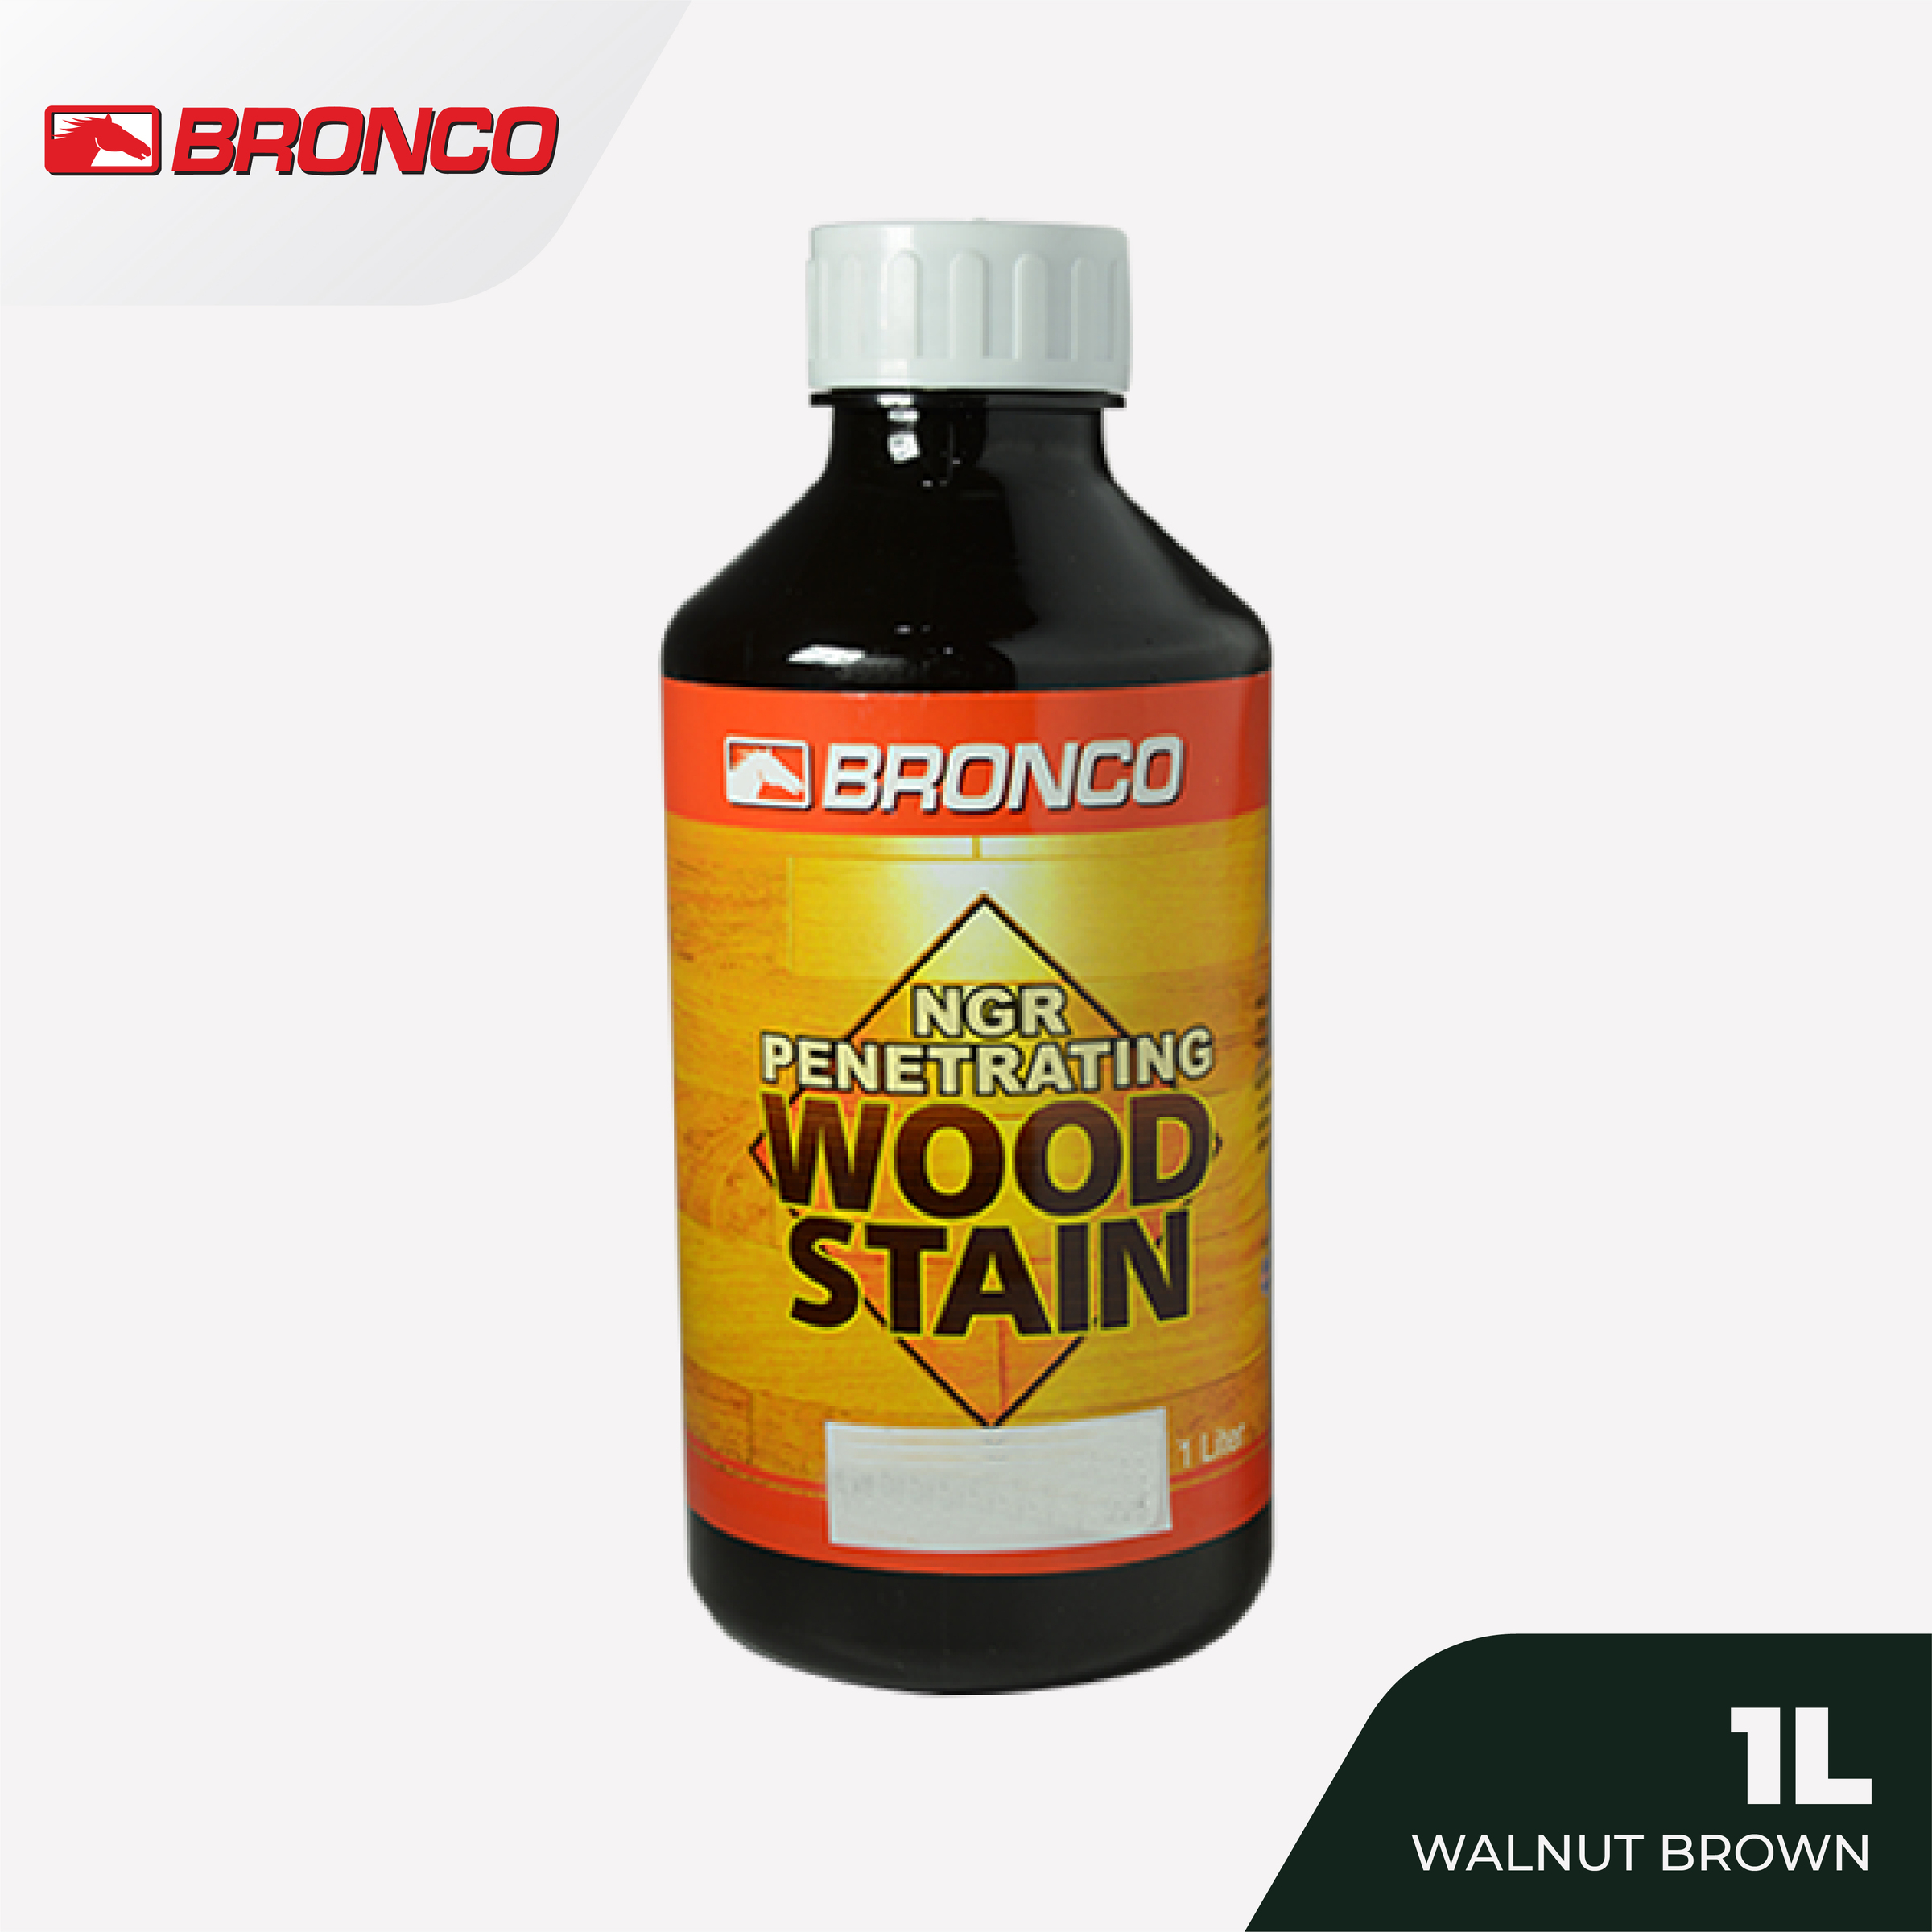 Bronco NGR Penetrating Wood Stain Walnut Brown - 1L